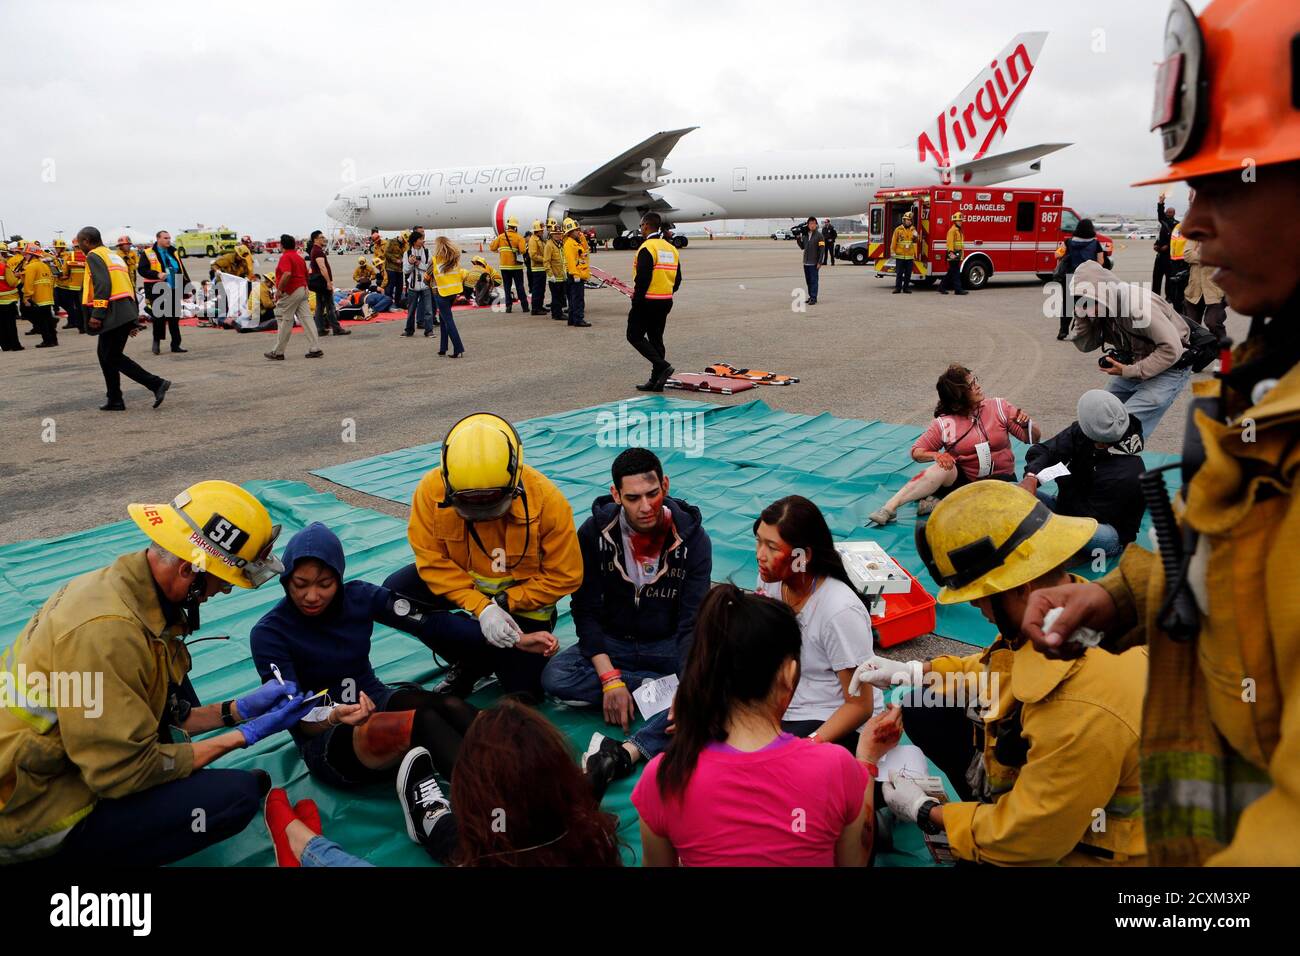 Actors portraying flight crash victims are treated by emergency personnel in a triage unit during the full-scale, LAX Air Exercise aircraft disaster simulation training drill at Los Angeles International Airport (LAX), in Los Angeles, California April 24, 2013. The LAX AirEx is a two-hour long simulated aircraft disaster with over 100 volunteers in moulage, role-playing as accident victims and is designed to test LAX's Emergency Response Plan, as required by the Federal Aviation Administration (FAA) at least once every three years to evaluate the operational capability and readiness of LAX's e Stock Photo